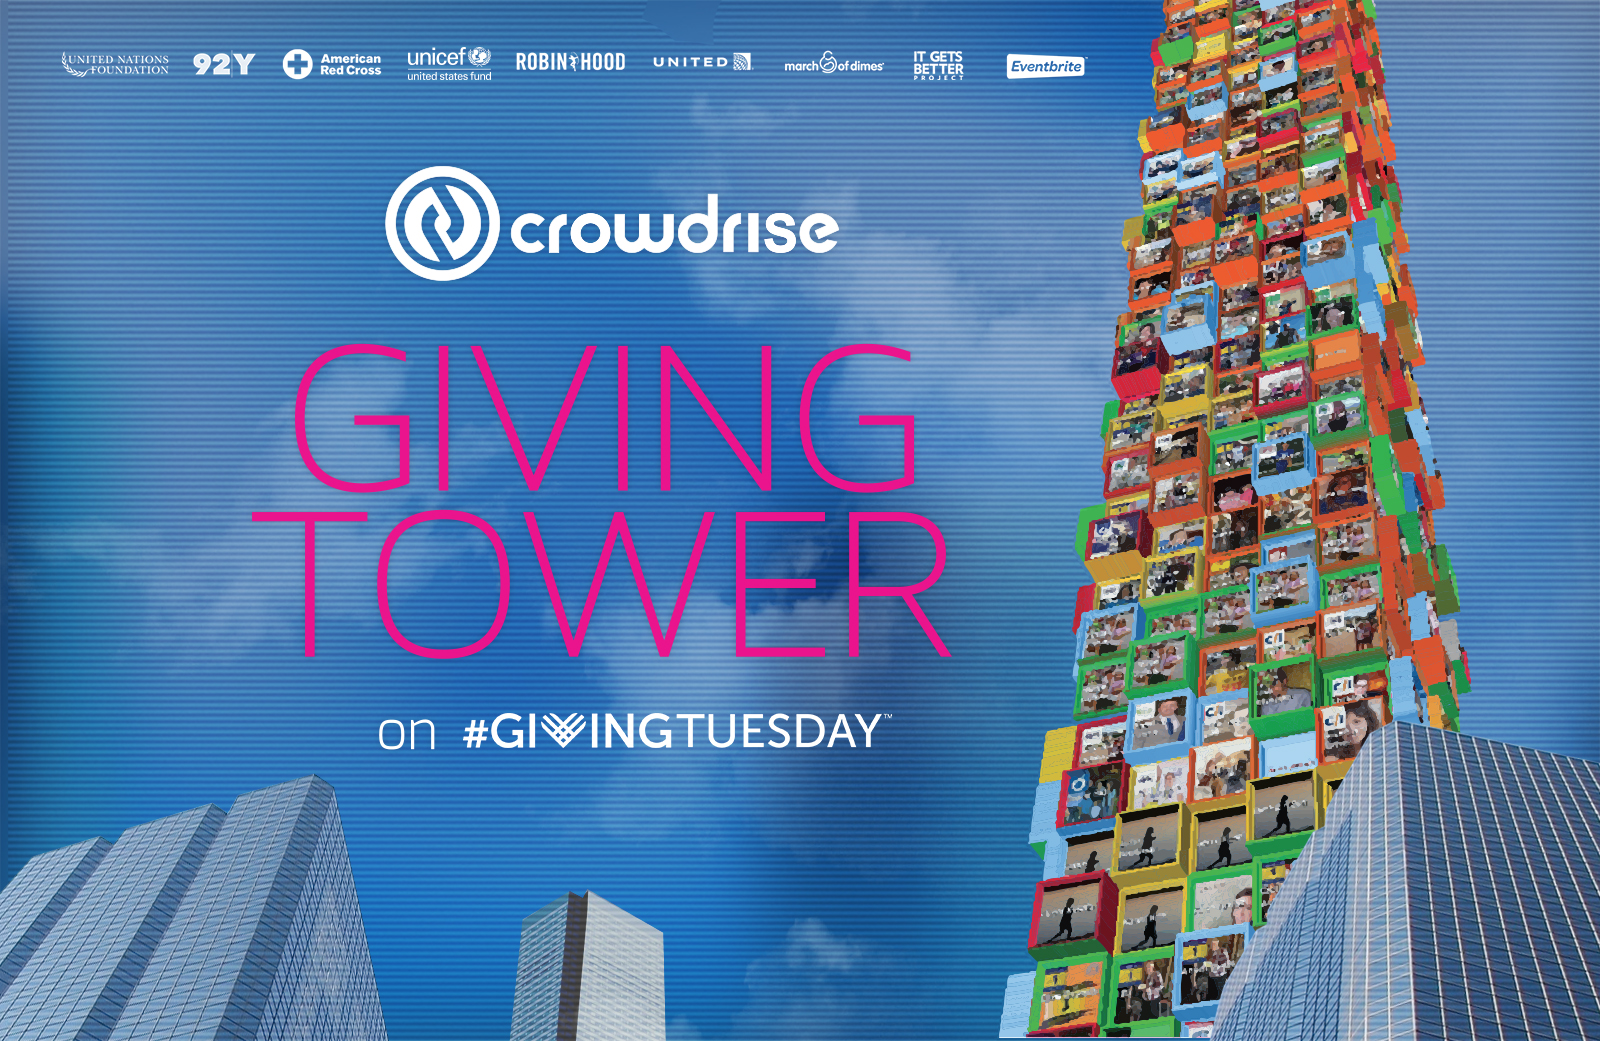 PHOTO: Promotional image for CrowdRise's Giving Tower for "#GivingTuesday."